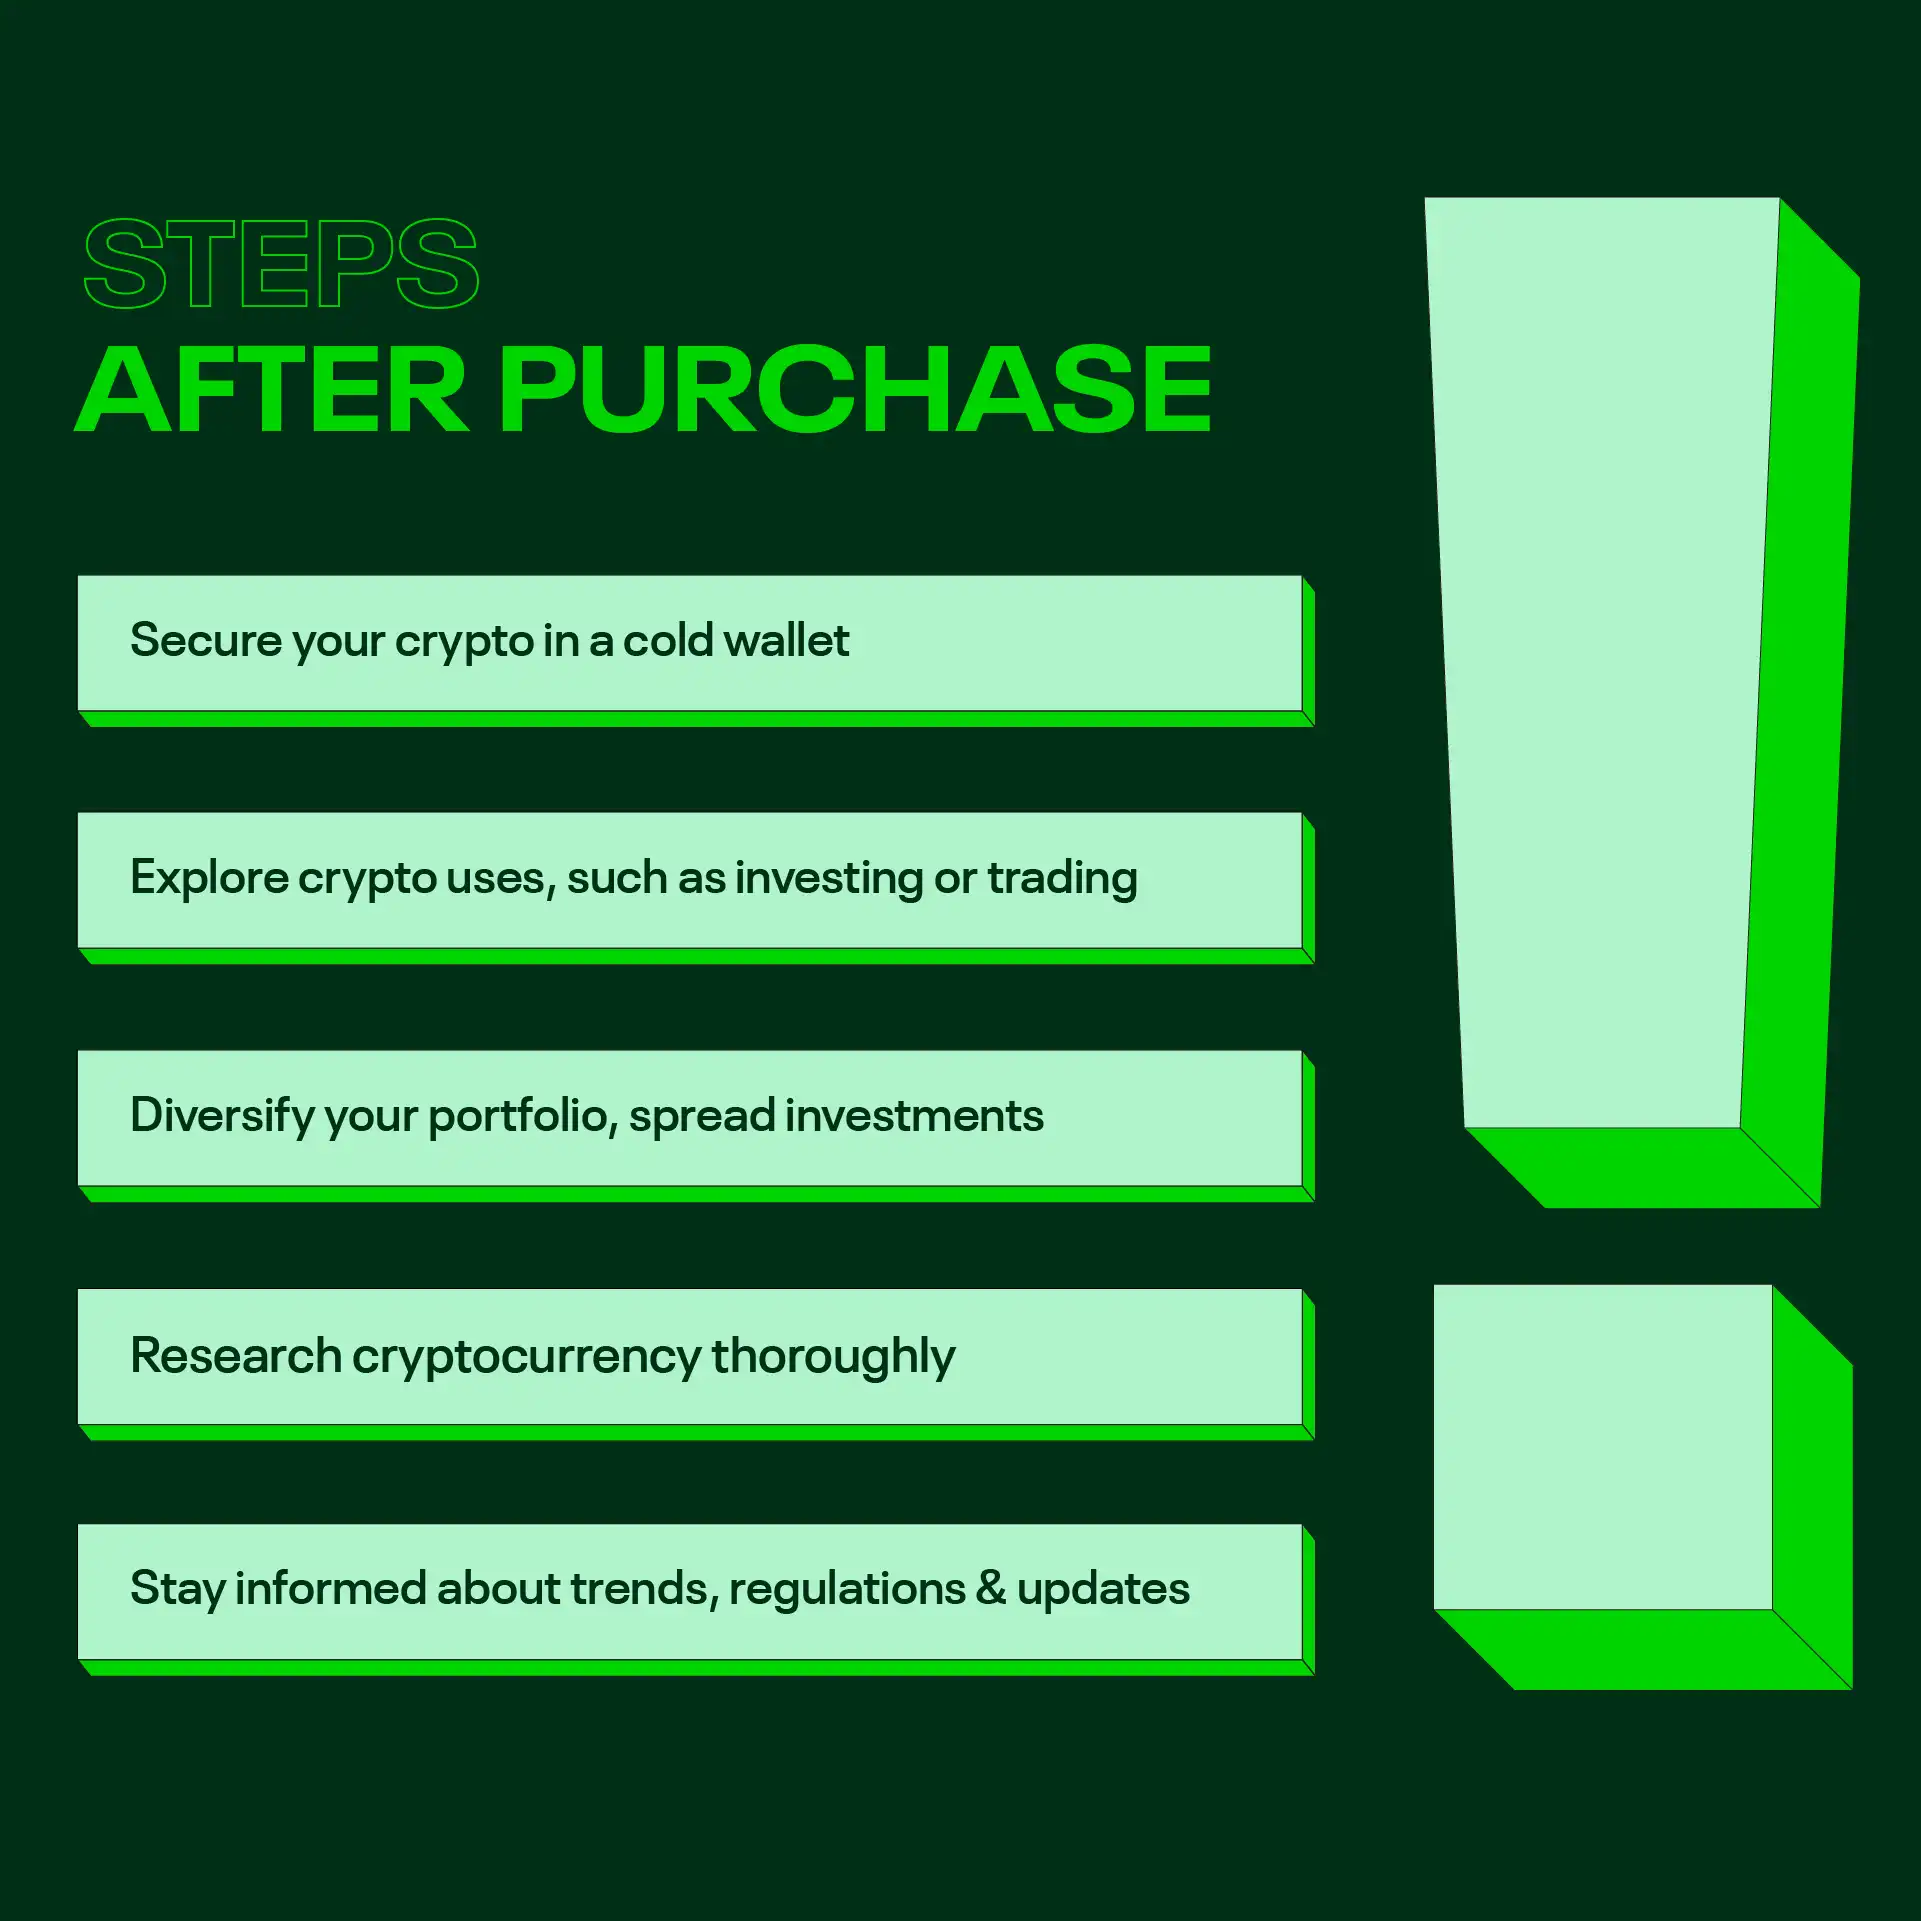 Steps after purchasing crypto